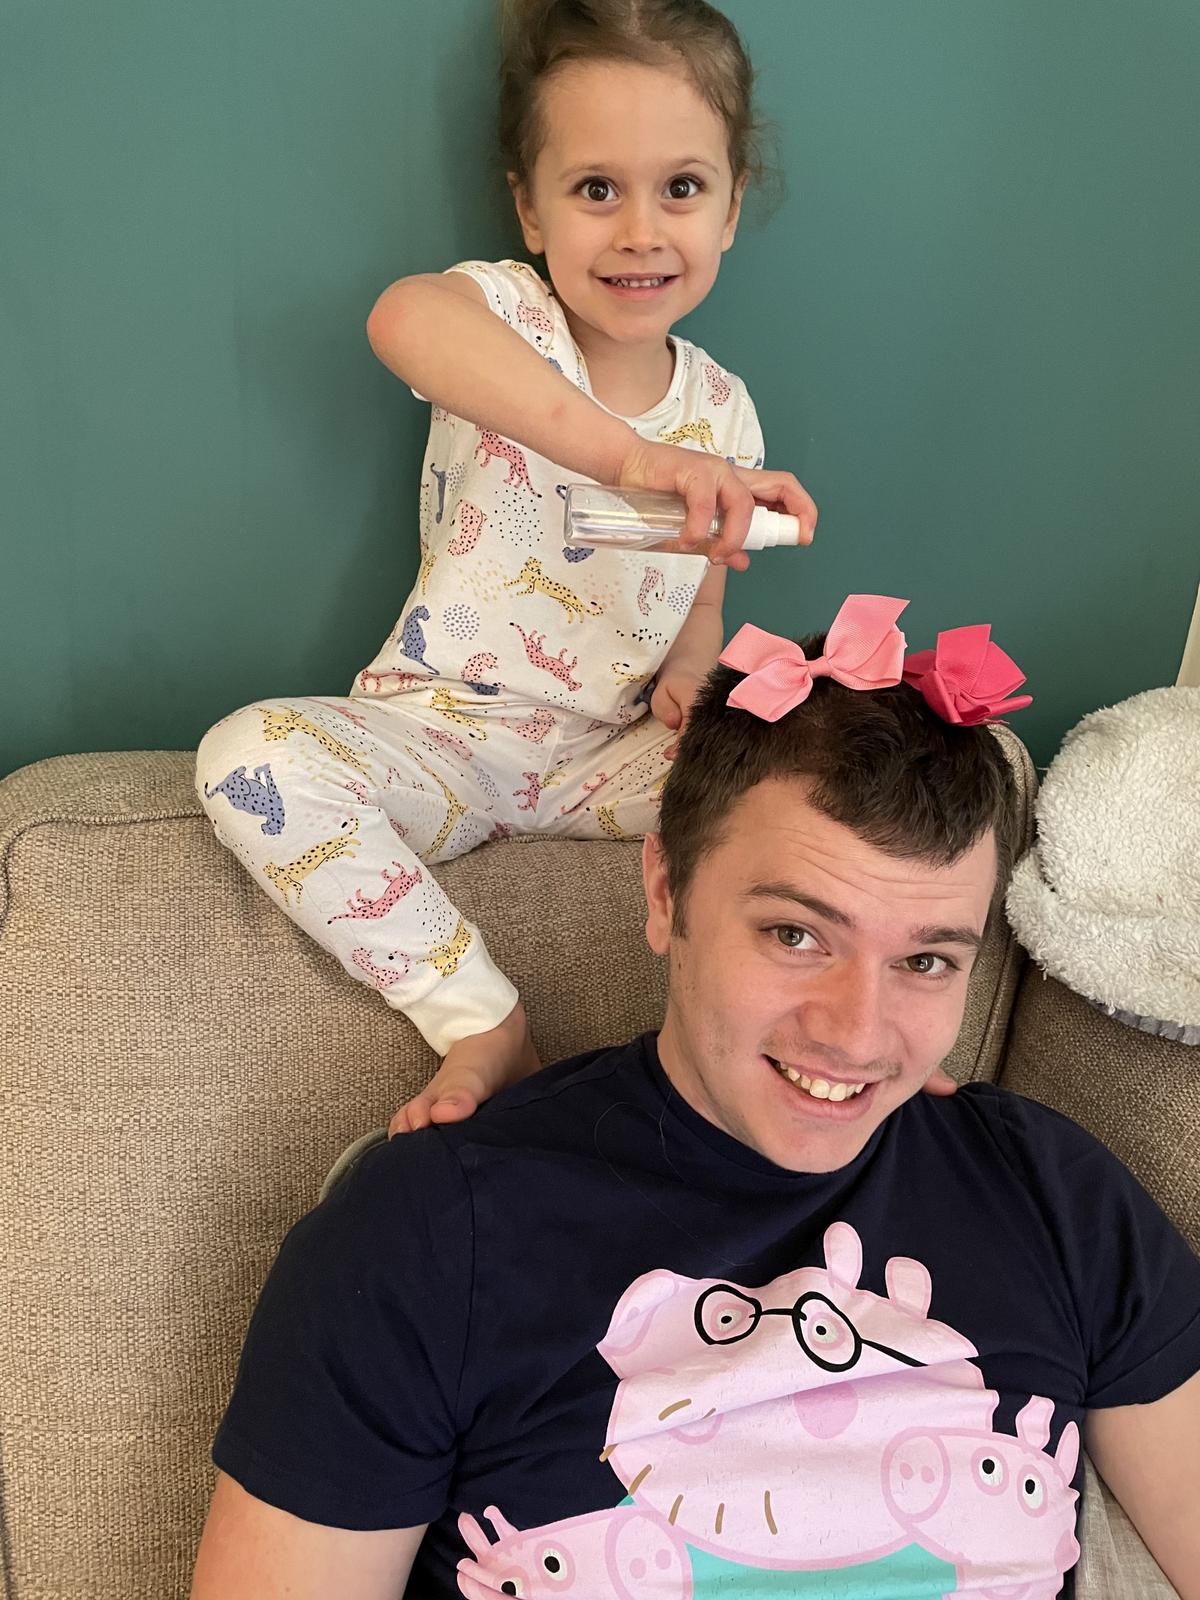 Callum Hartley getting his hair done by his daughter. (Kennedy News and Media)